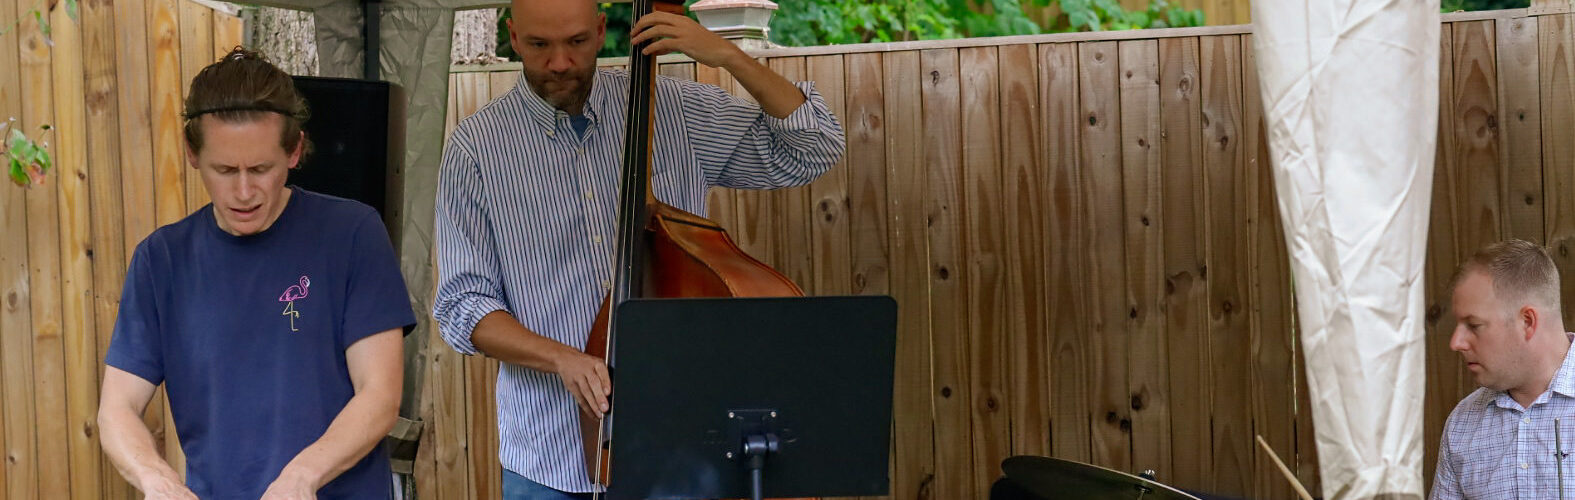 Jay Frost Trio at PorchFest DC; Official Photo